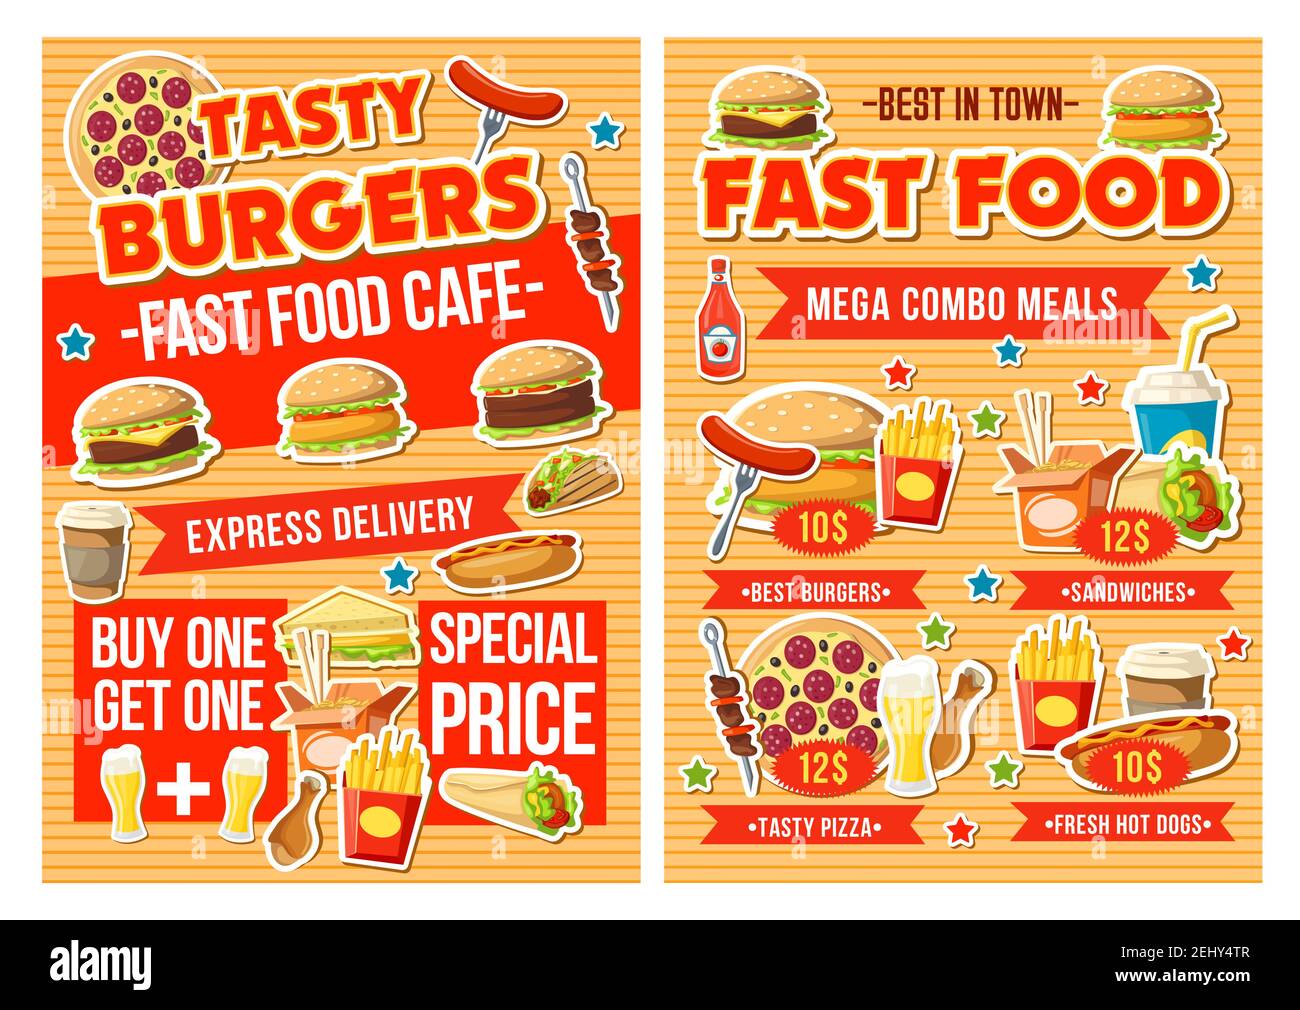 Fast food restaurant combo meal menu vector design with special